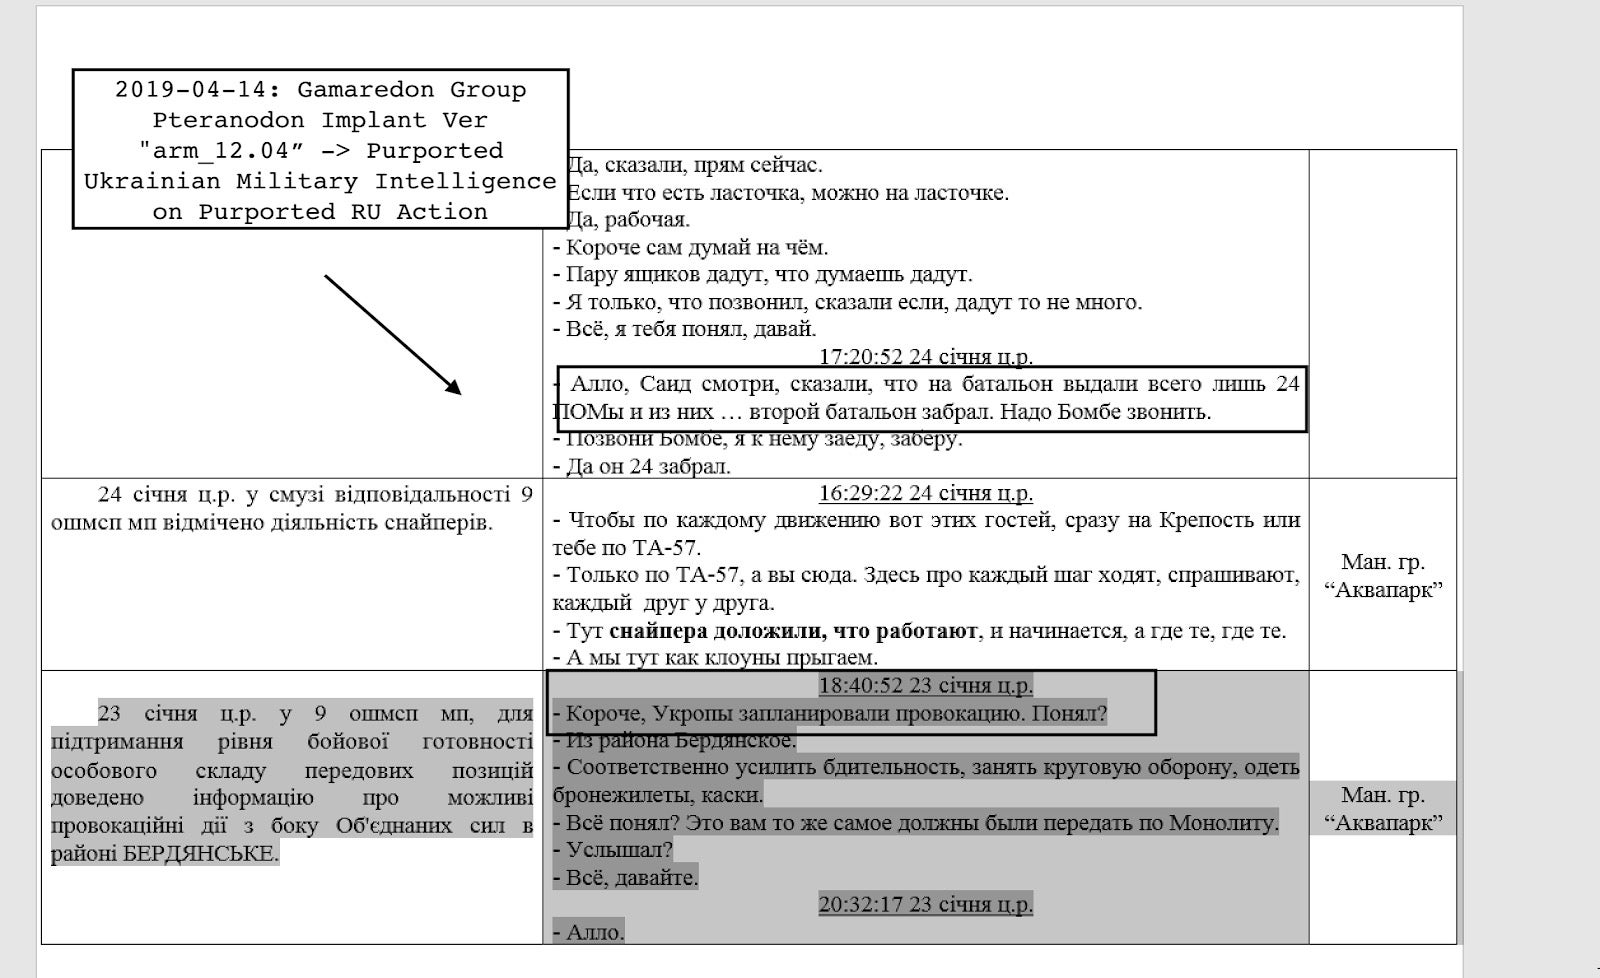 image of Ukrainian military intelligence report on purported Russian cyber warfare action